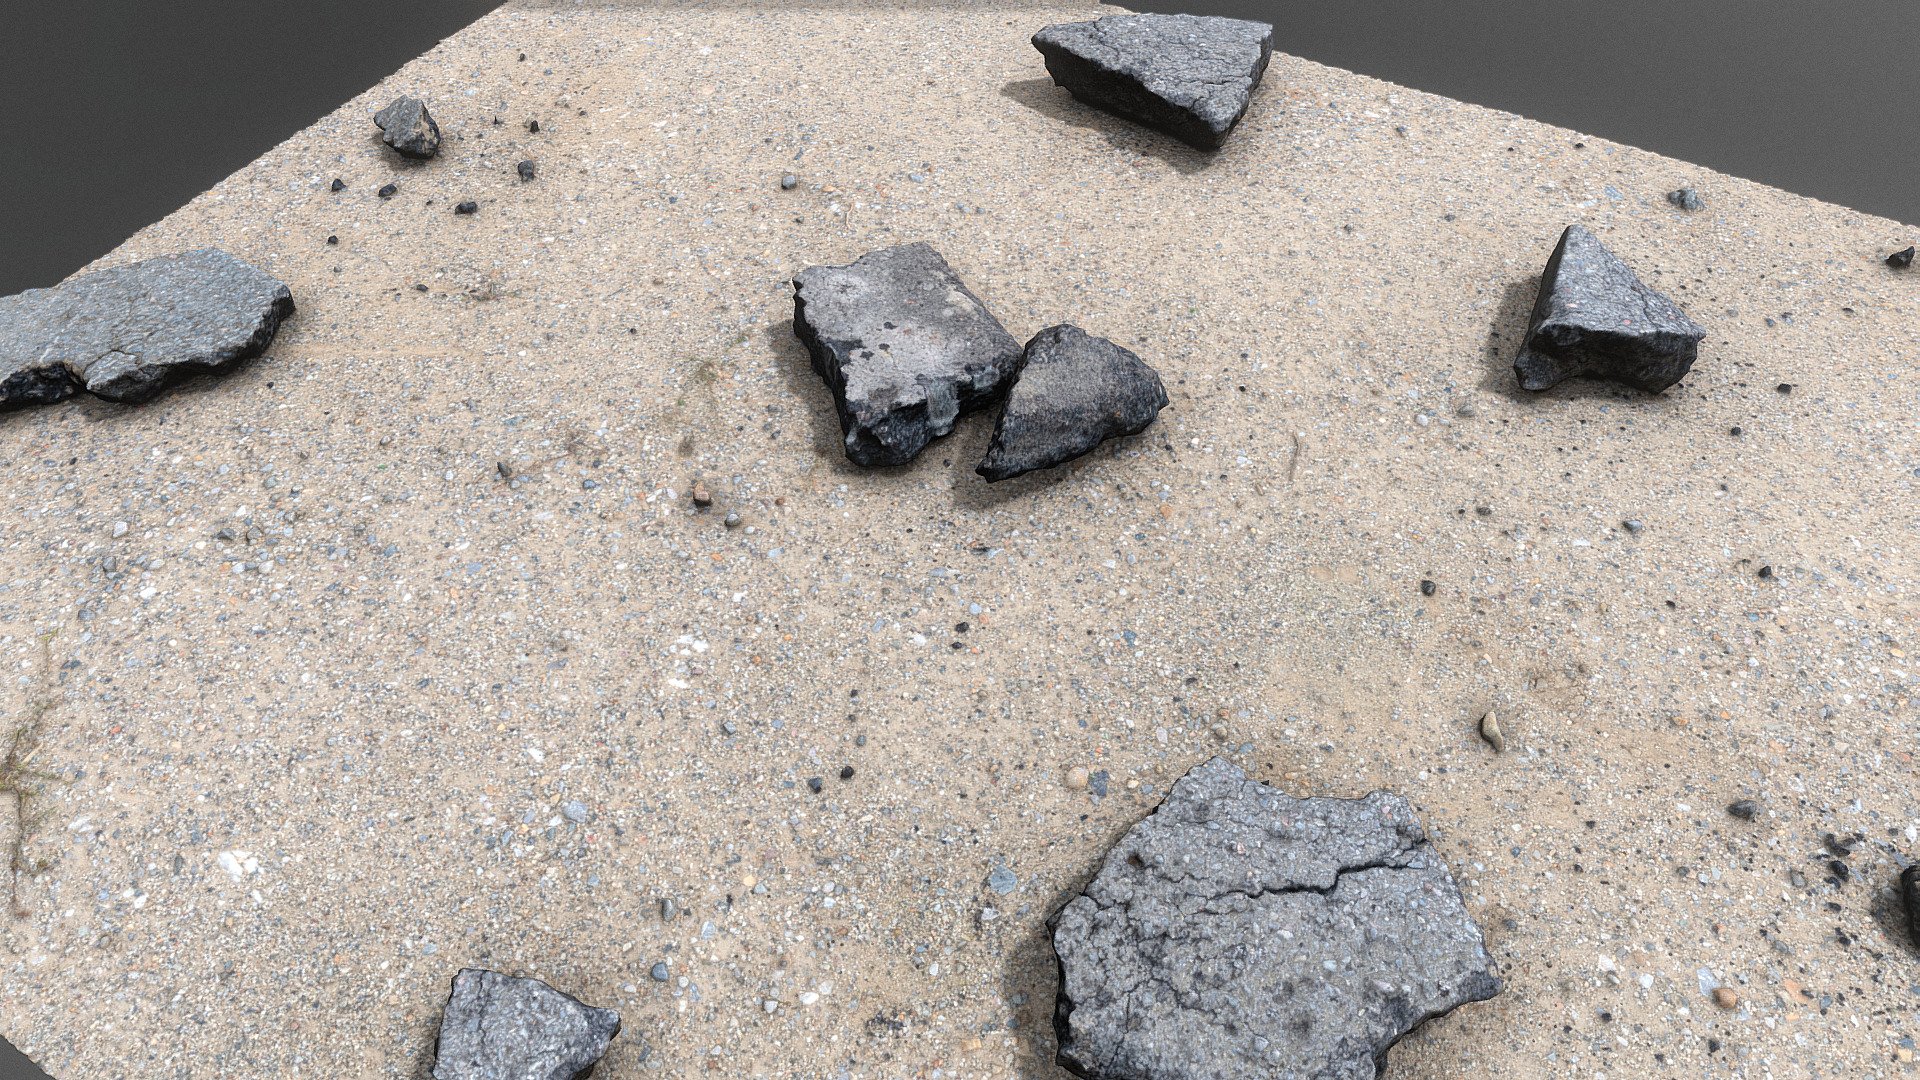 Asphalt road pieces fragments on dusty sandy ground with small pebble stones

Photogrammetry scan 120x24MP, 16K texture - Asphalt fragments on dusty ground - Buy Royalty Free 3D model by matousekfoto 3d model